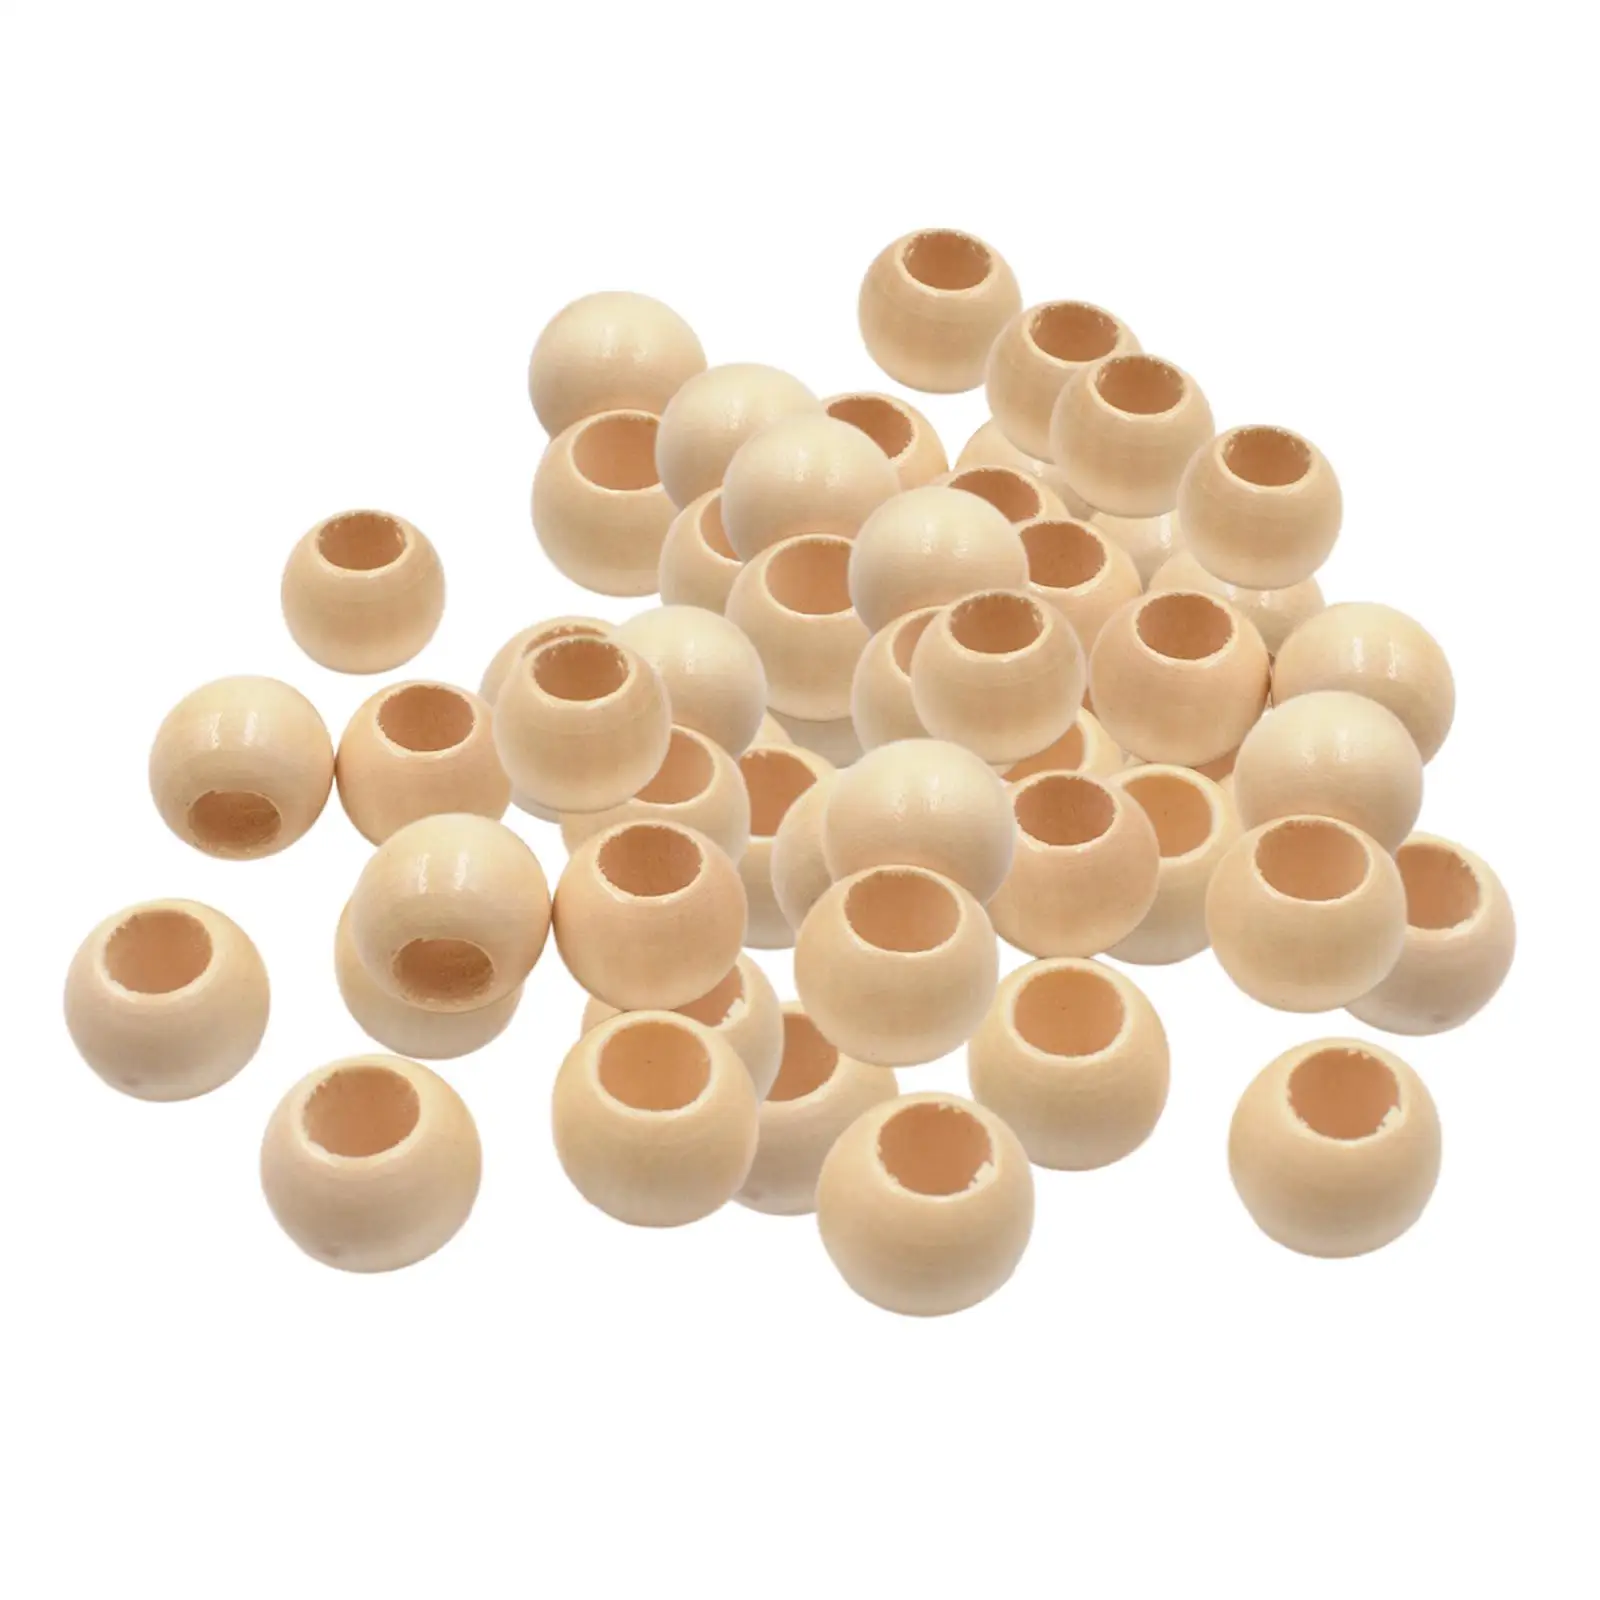 100Pcs Wood Beads Craft with Holes 20mm Spacer Bead Halloween Decorations for Jewelry Making Holiday Decoration Supplies Party